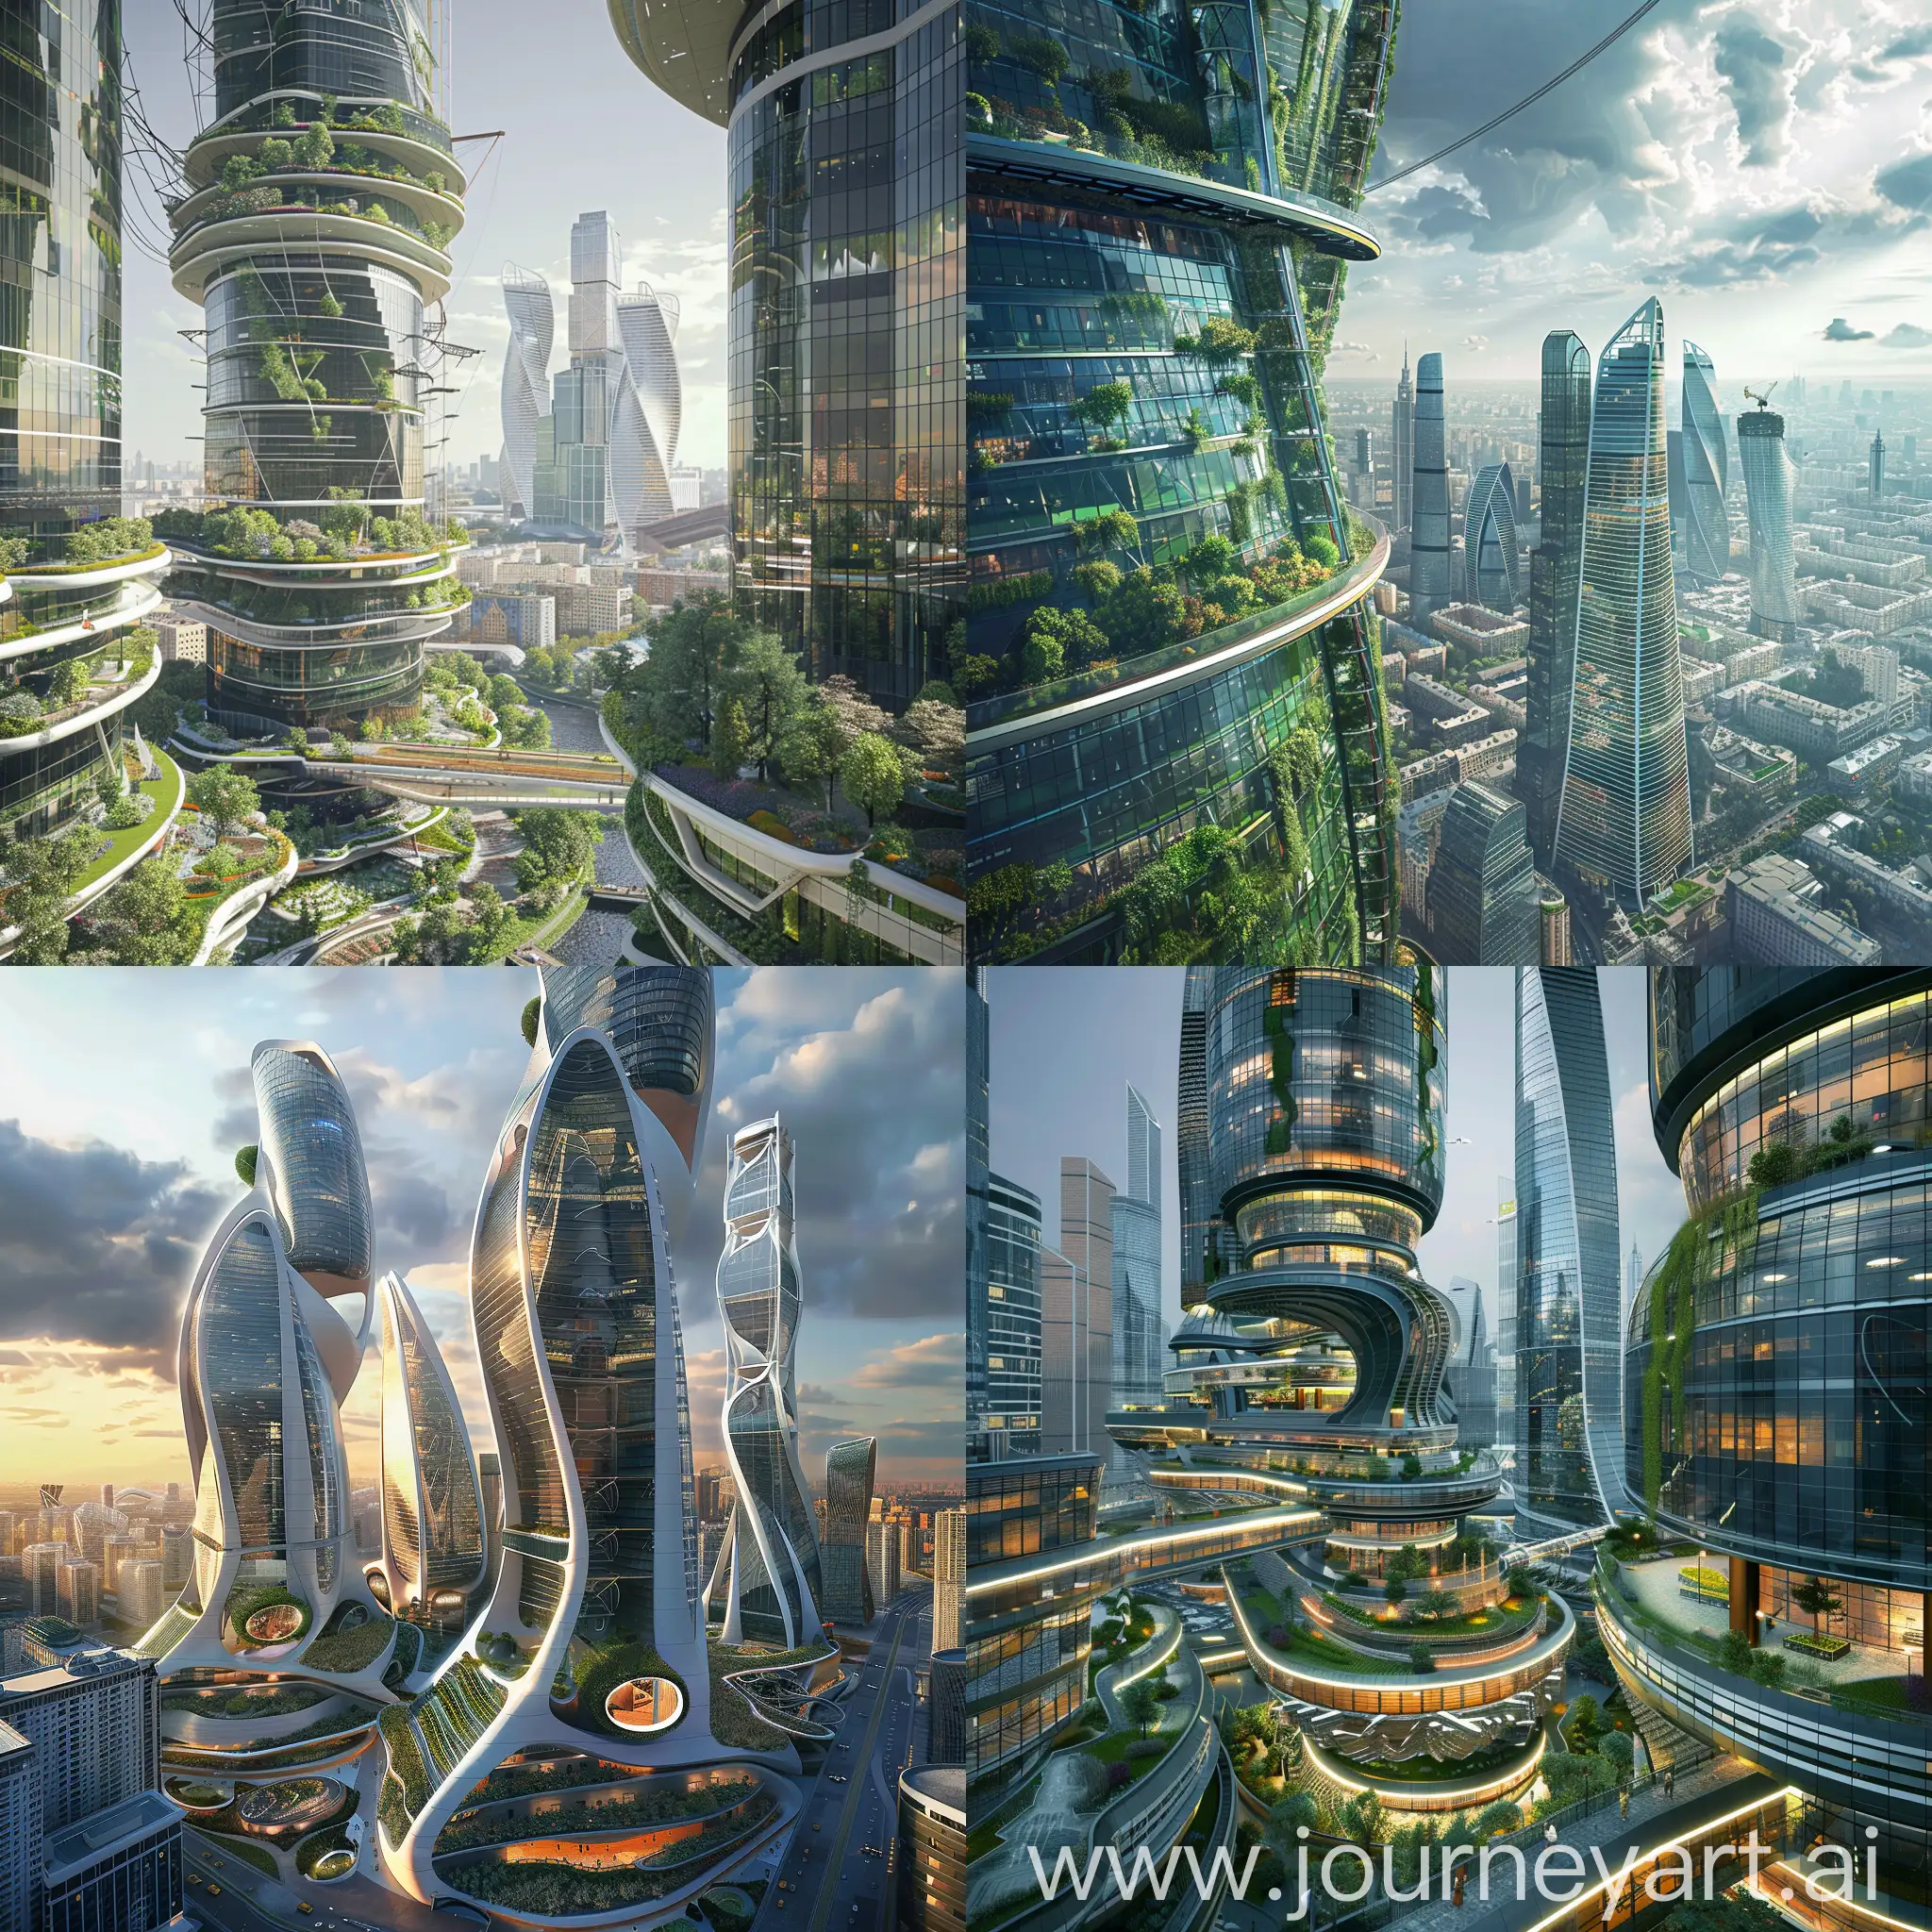 Futuristic Moscow, Smart Windows, Modular Construction, Vertical Gardens, Energy Floors, Water Reclamation Systems, Drones and Robot Assistants, 3D-Printed Components, AI-Integrated Infrastructure, Responsive Lighting, Atmospheric Water Generators, Self-Healing Concrete, Solar Panel Skins, Dynamic Facades, Wind Turbine Integration, Smart Lighting, Pollution-Eating Buildings, Interactive Public Spaces, Green Transportation Hubs, Urban Mobility Systems, Climate-Responsive Landscaping, unreal engine 5 --stylize 0